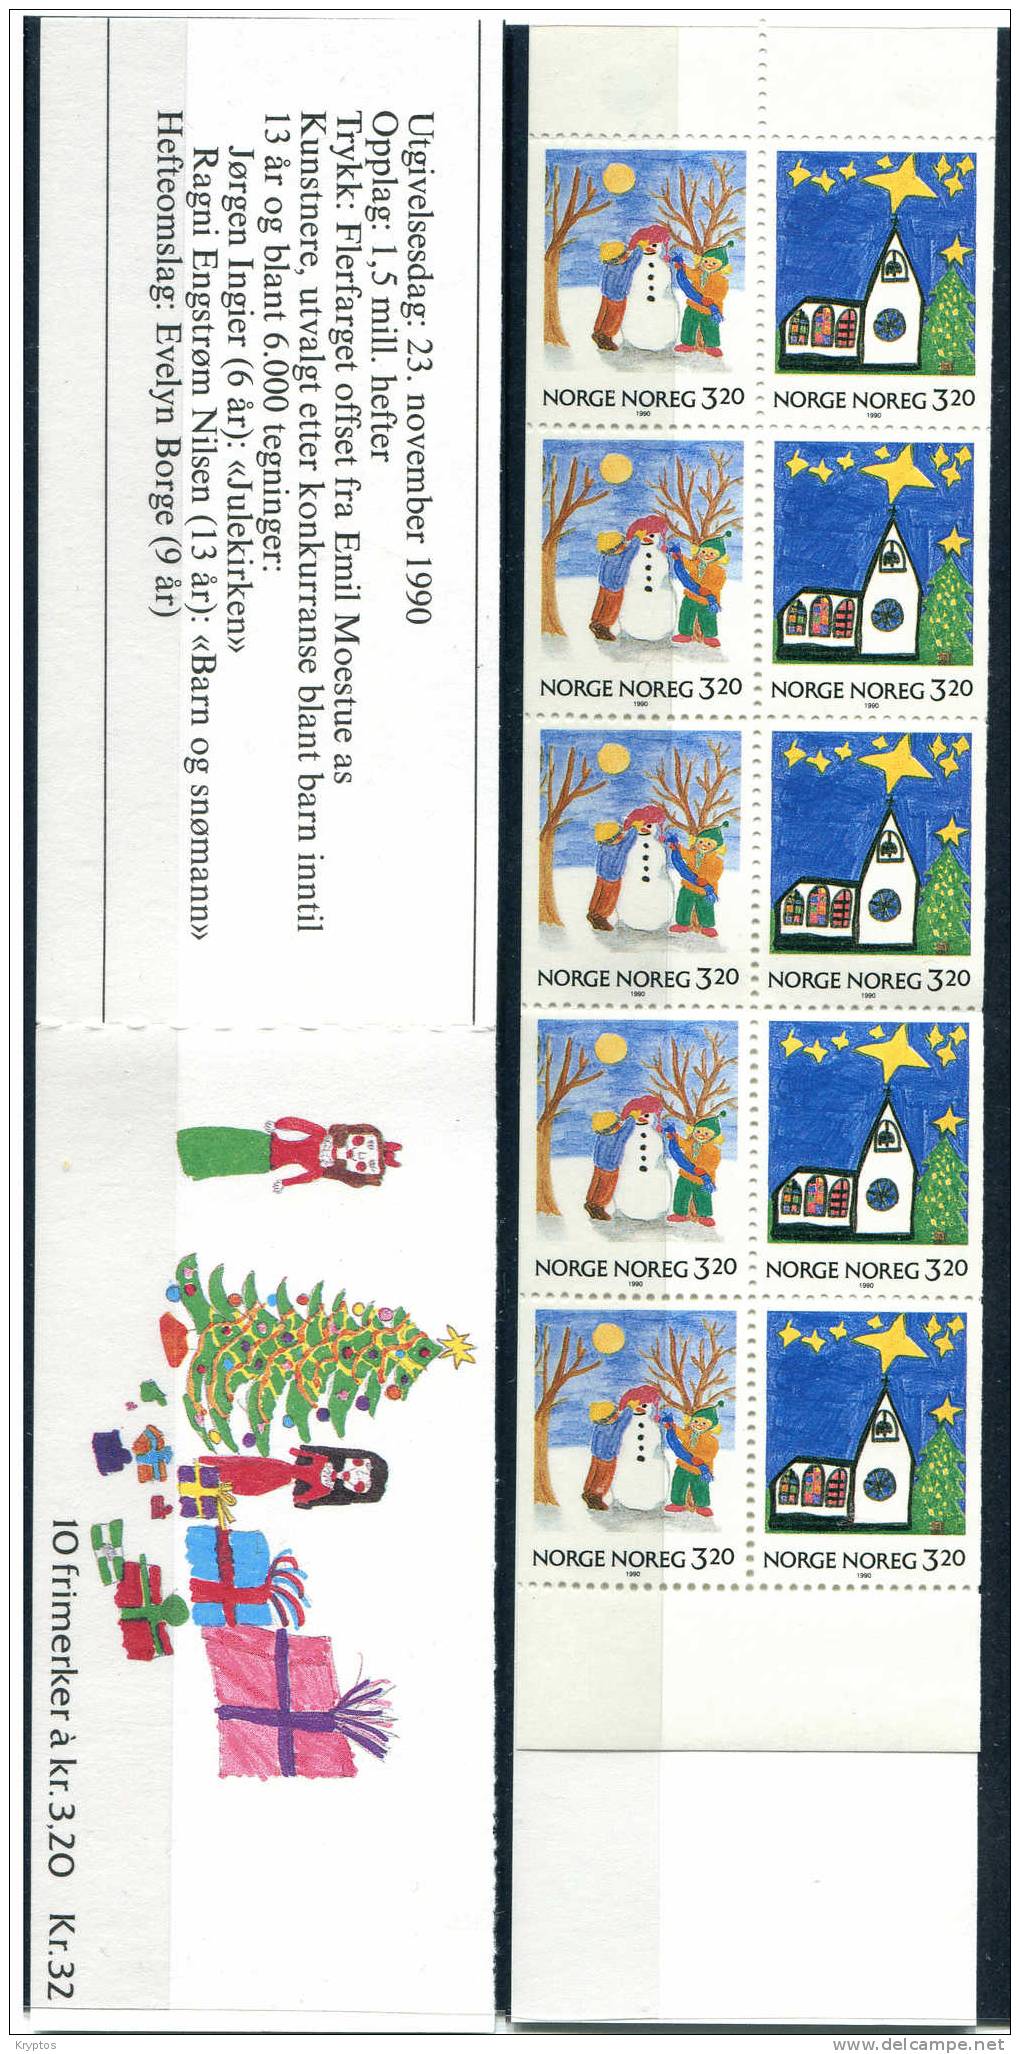 Norway 1990 - Christmas - Complete Booklet Set - Booklets